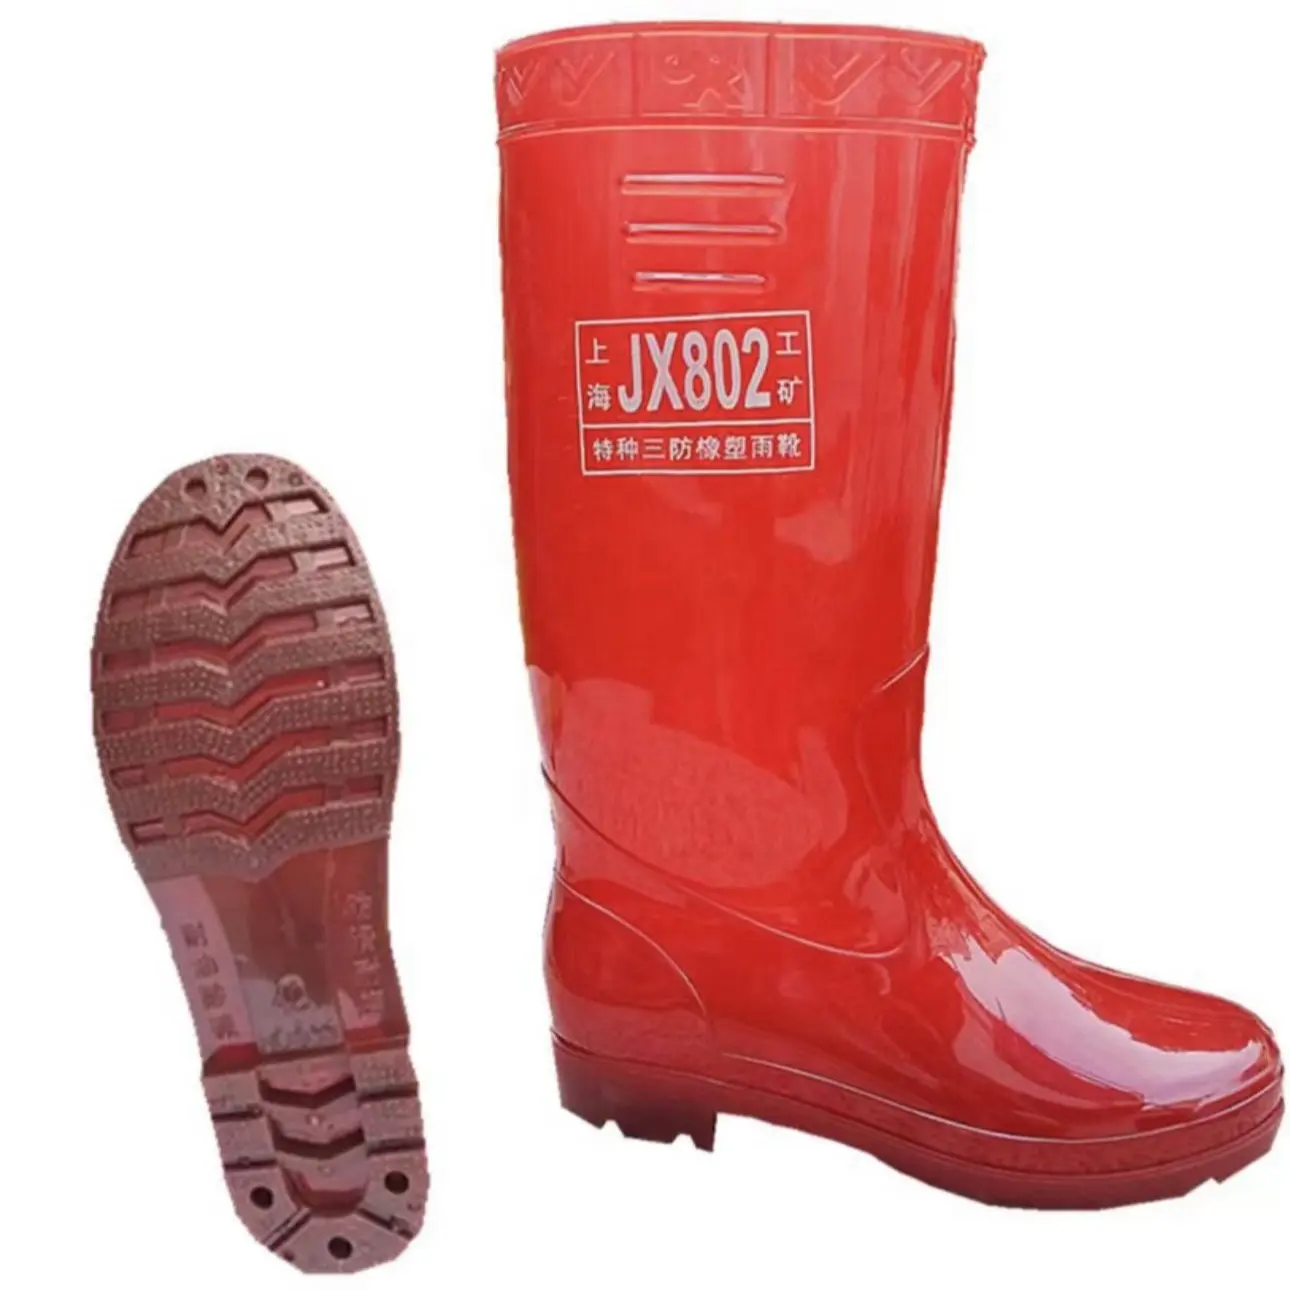 Huge Discount Pvc Shiny Red Rain Boots Men Clear Light Weight Water Shoes For Worker Safety Gumboots